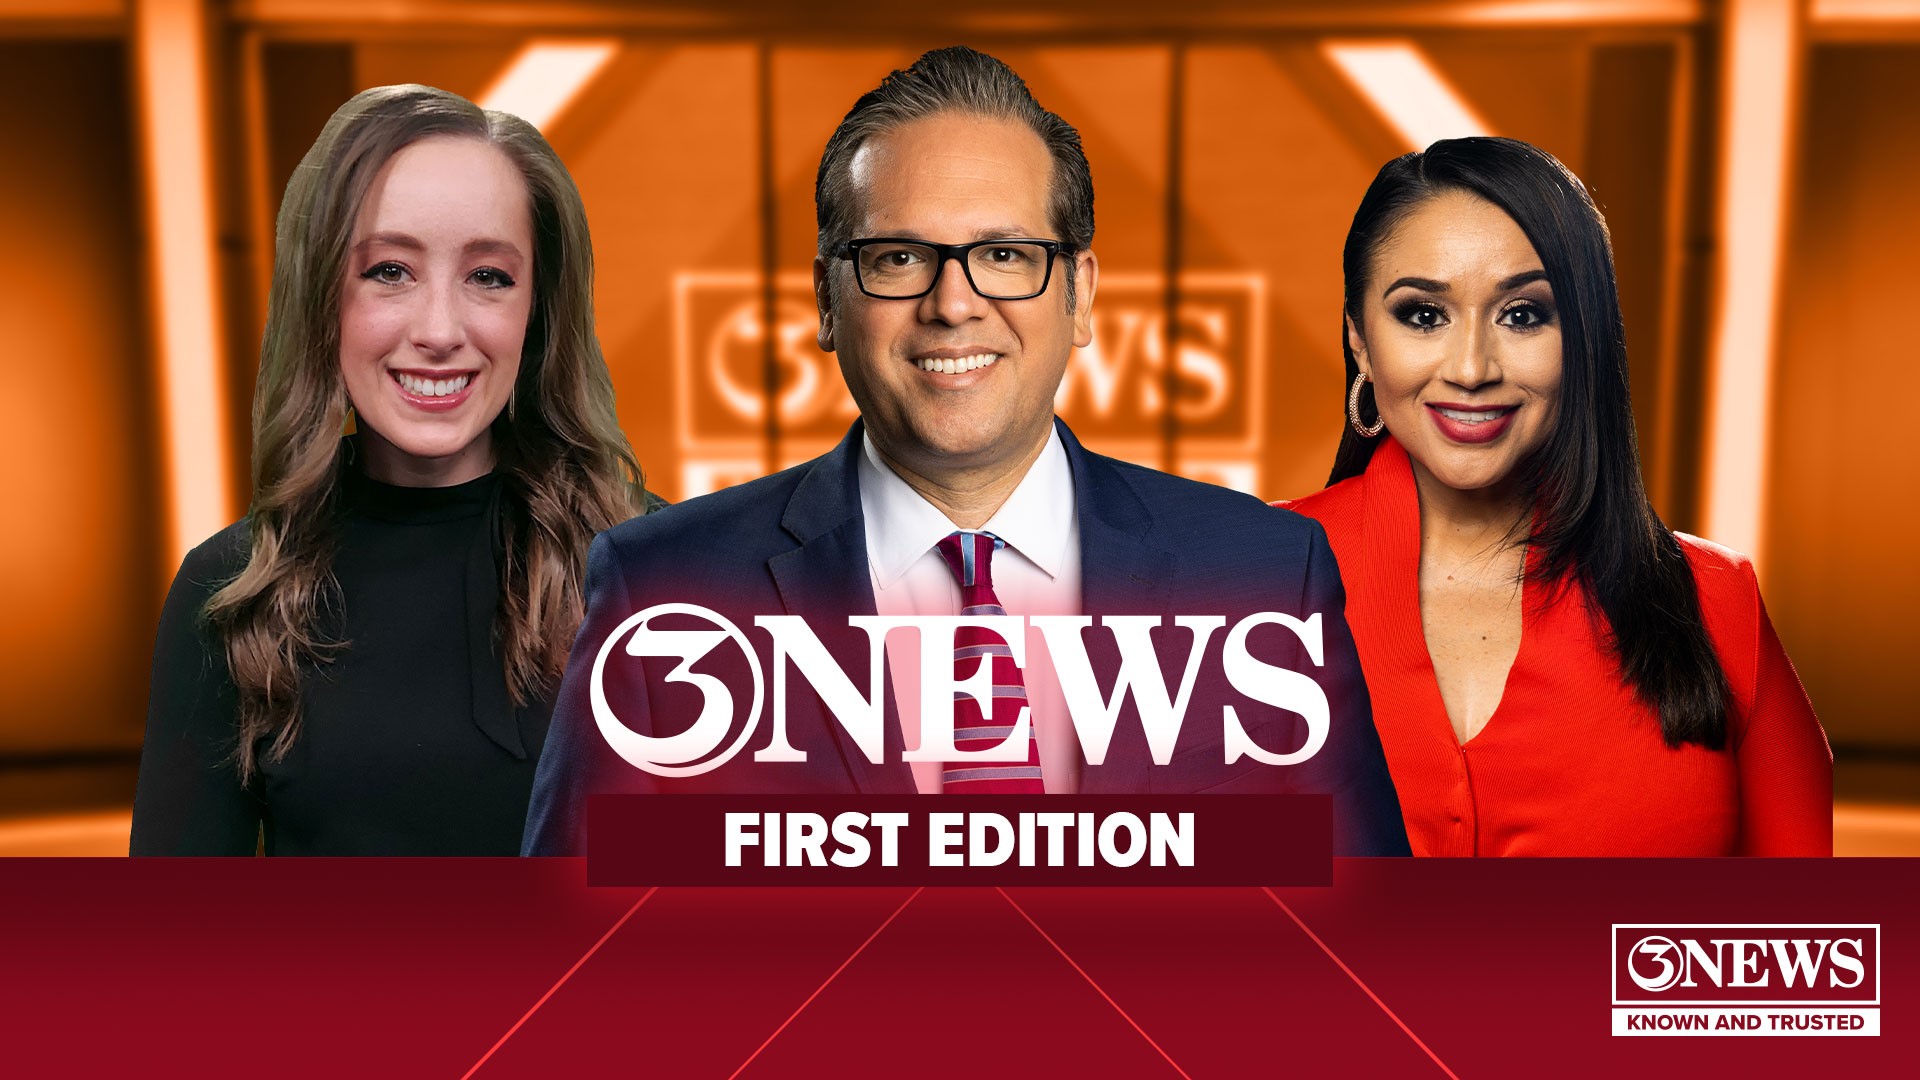 3News gets your day started with news, weather and fun. Join John-Thomas Kobos, Barbi Leo and meteorologist Carly Smith every morning starting at 5 a.m.